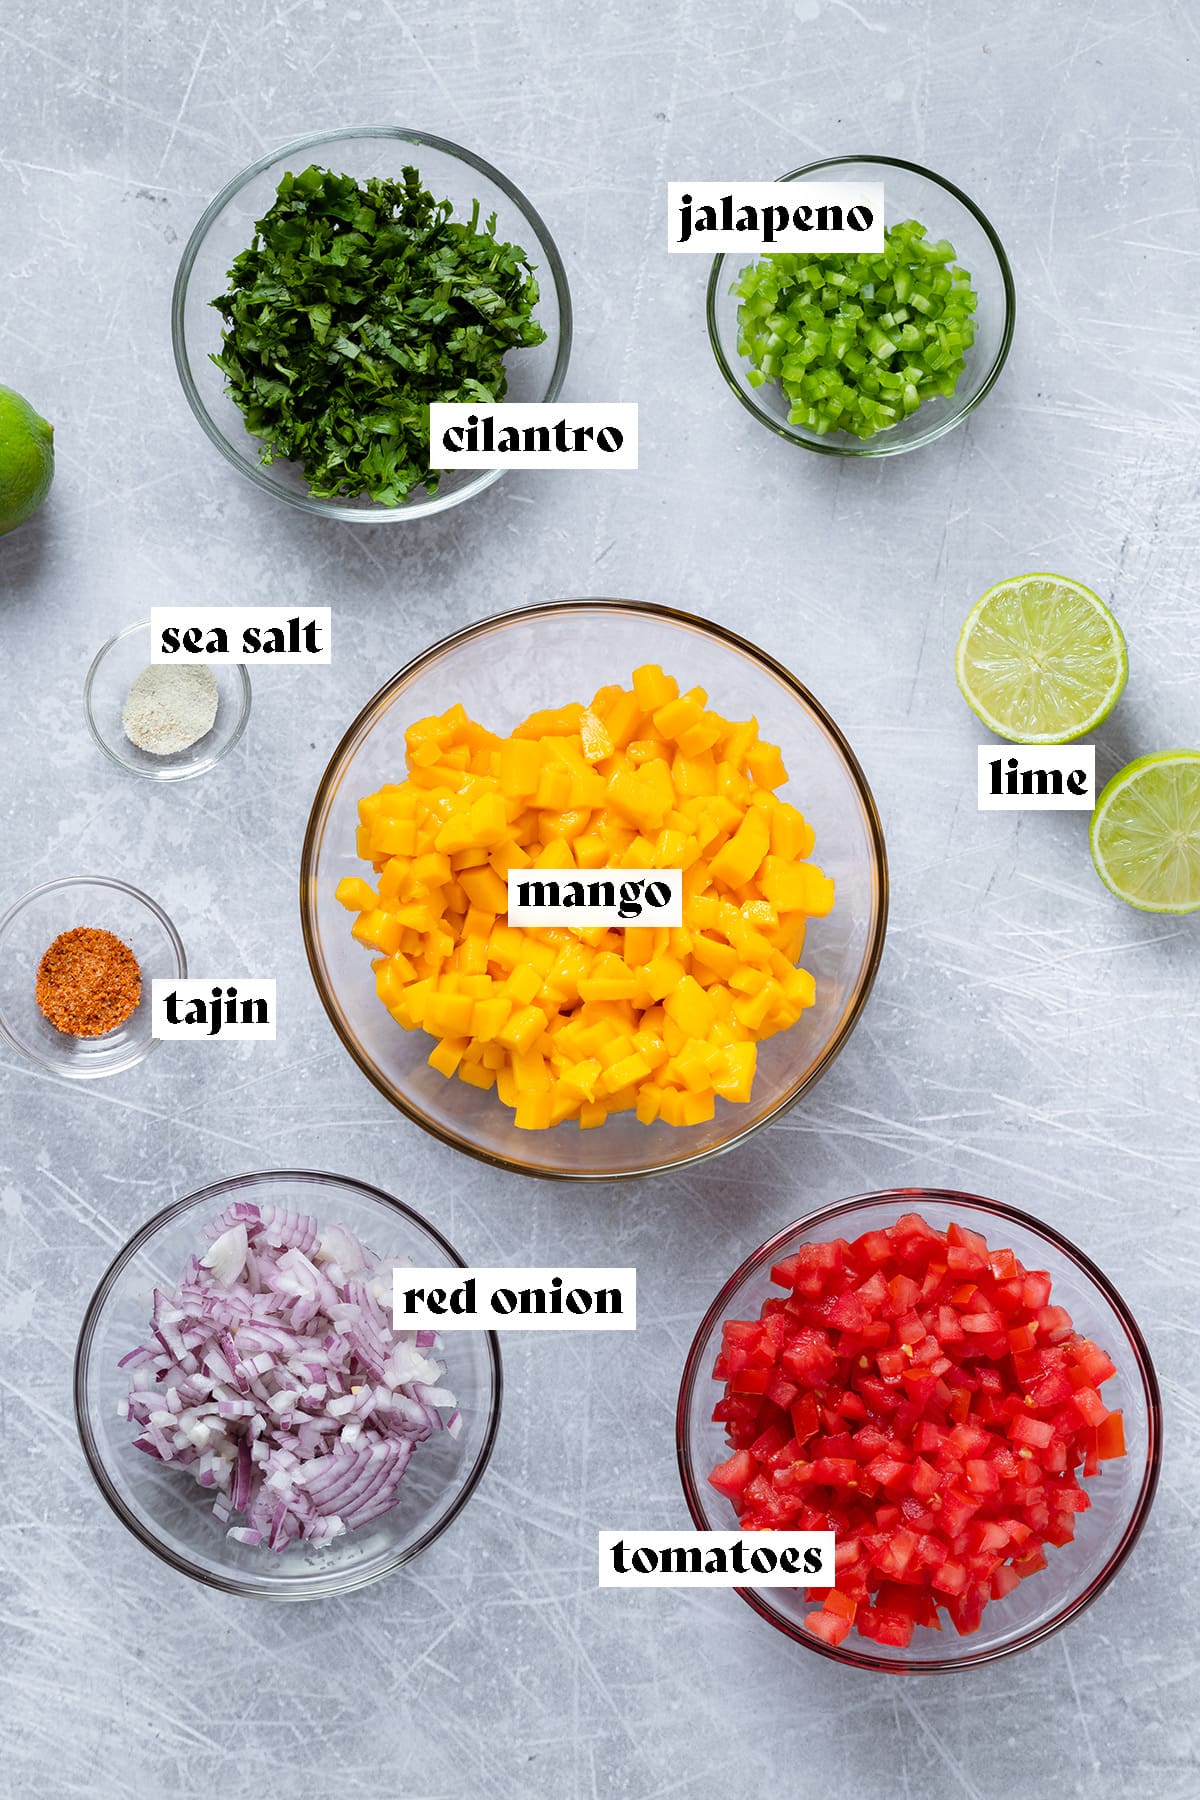 Ingredients for mango pico de gallo like chopped mango, tomatoes, and jalapeno all laid out.